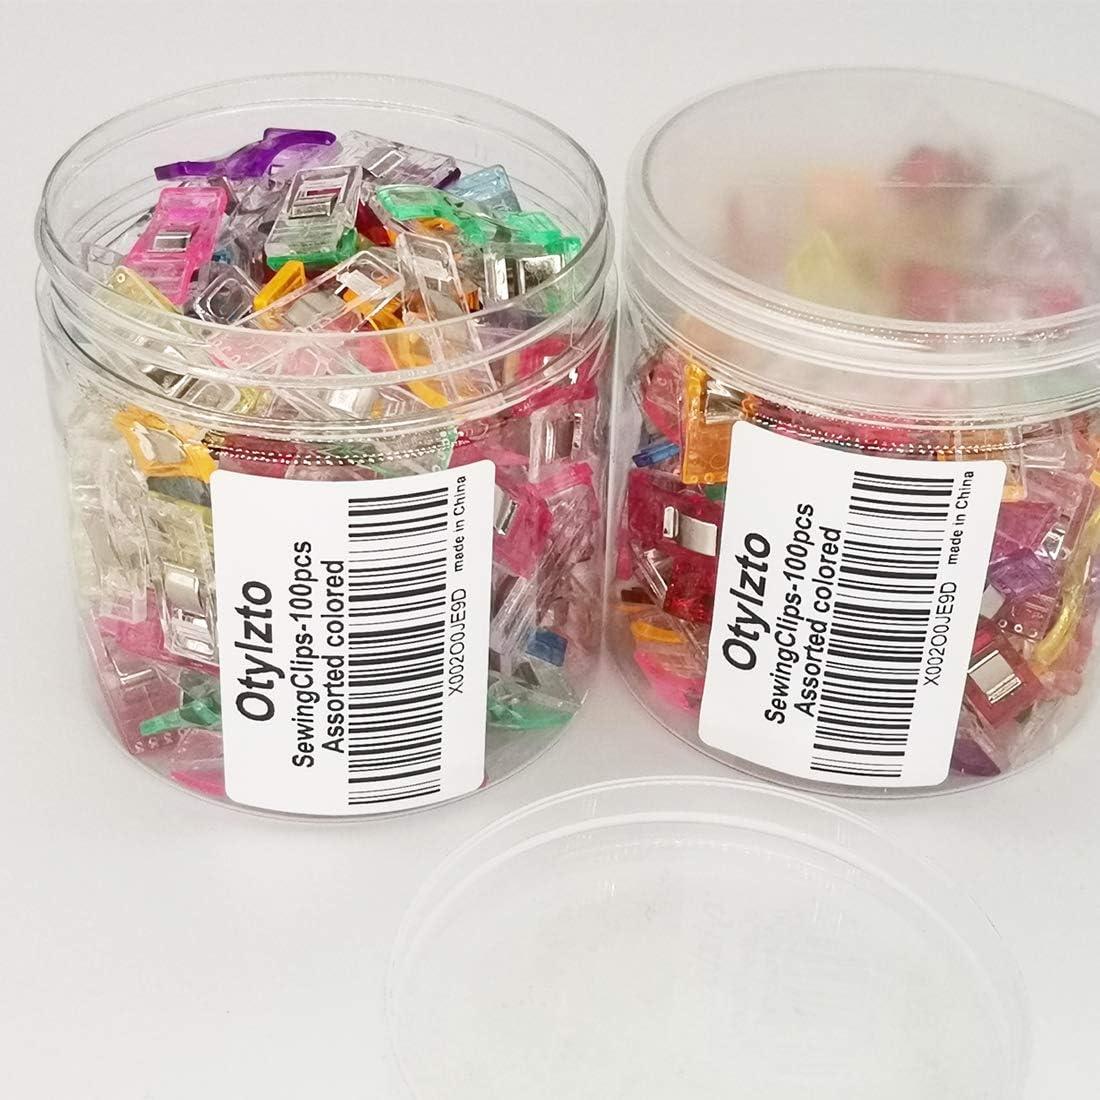 New Product,sewing Clips, 100 Pcs. Premium Colorful Clip Sewing